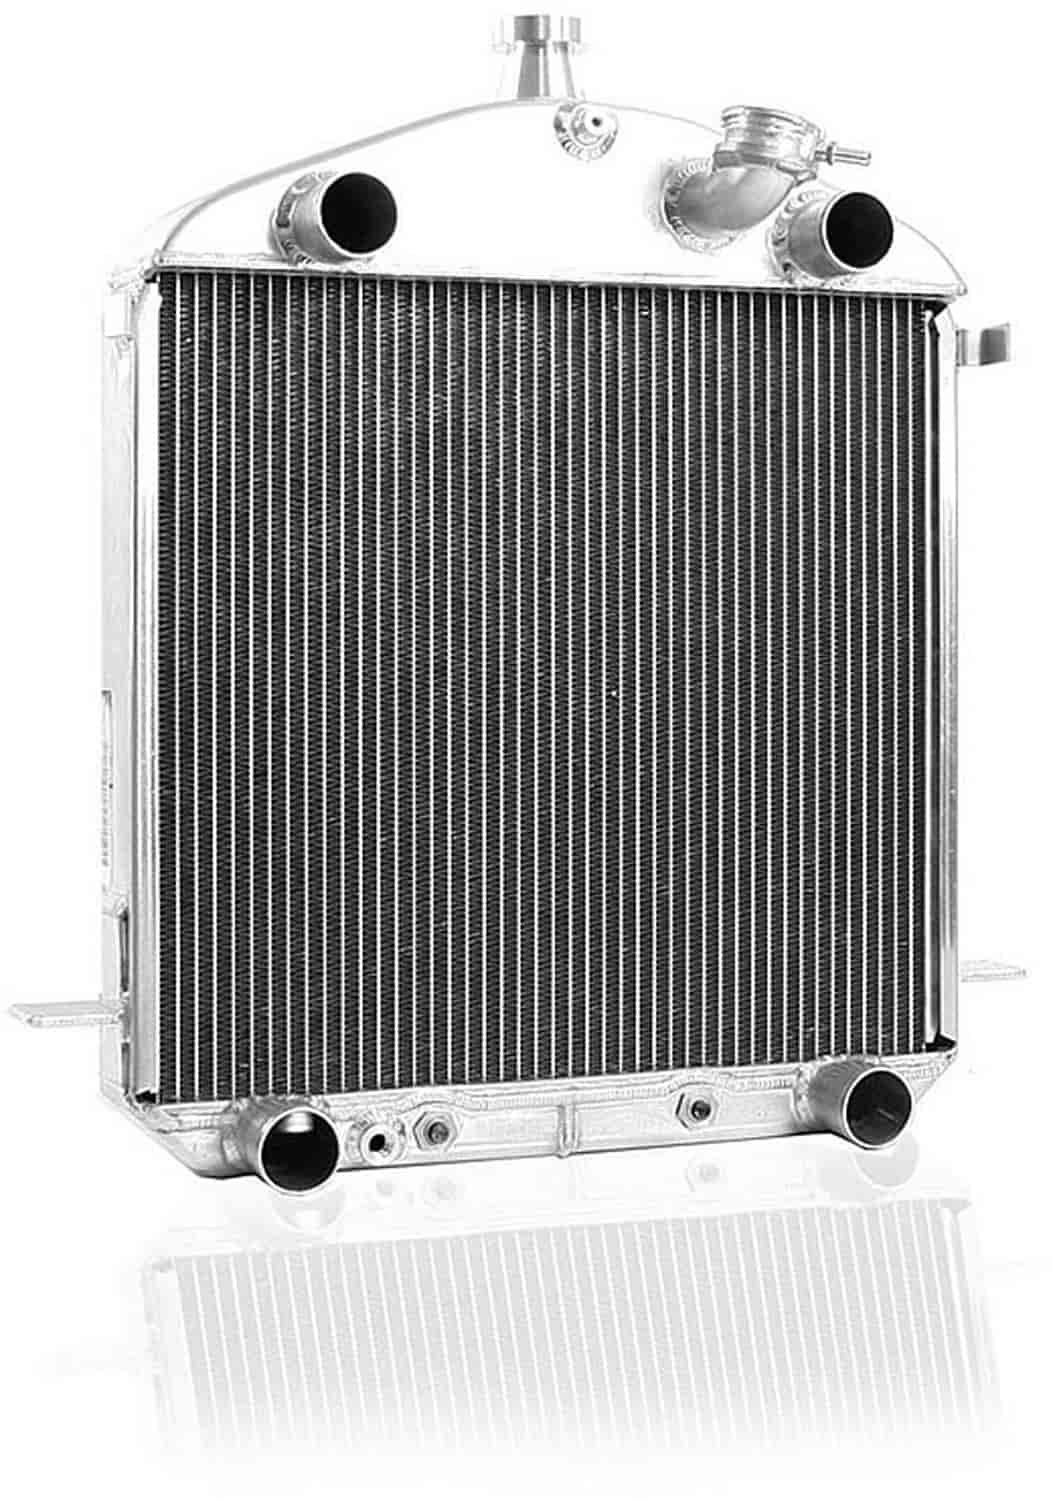 ExactFit Radiator for 1927 Model T with Early Ford Flathead V8